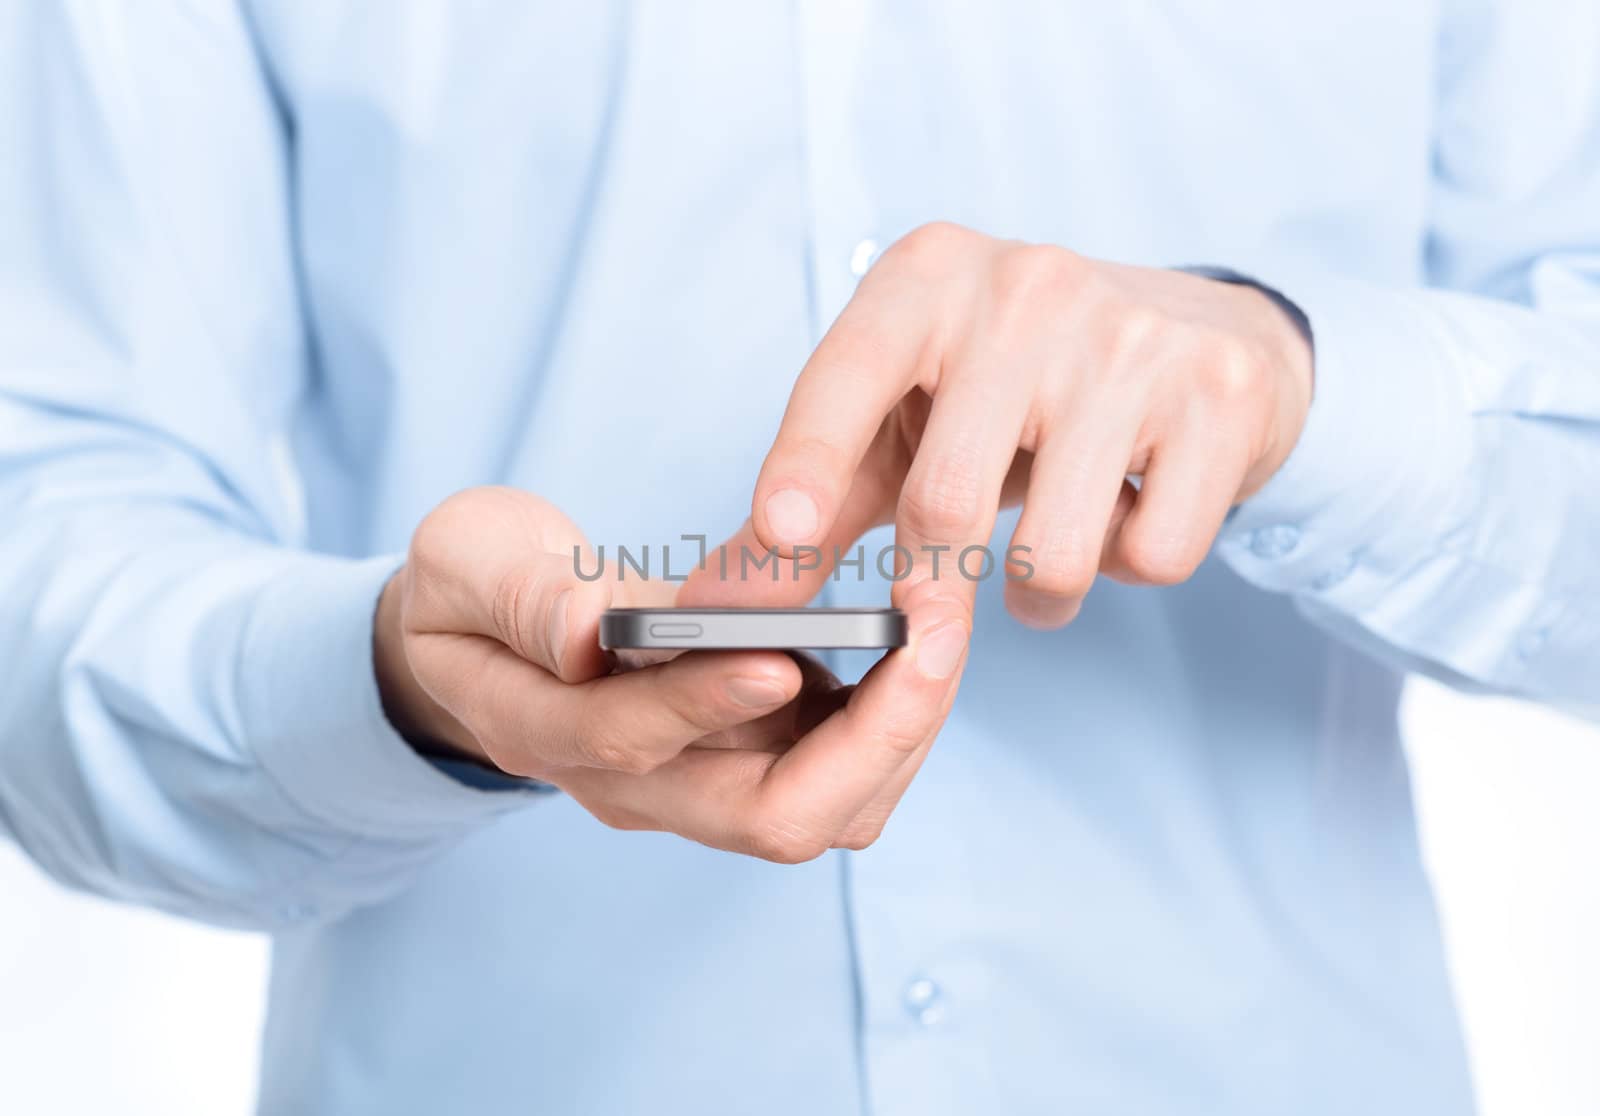 Businessman holding and touching screen on mobile phone. Close-up photo.